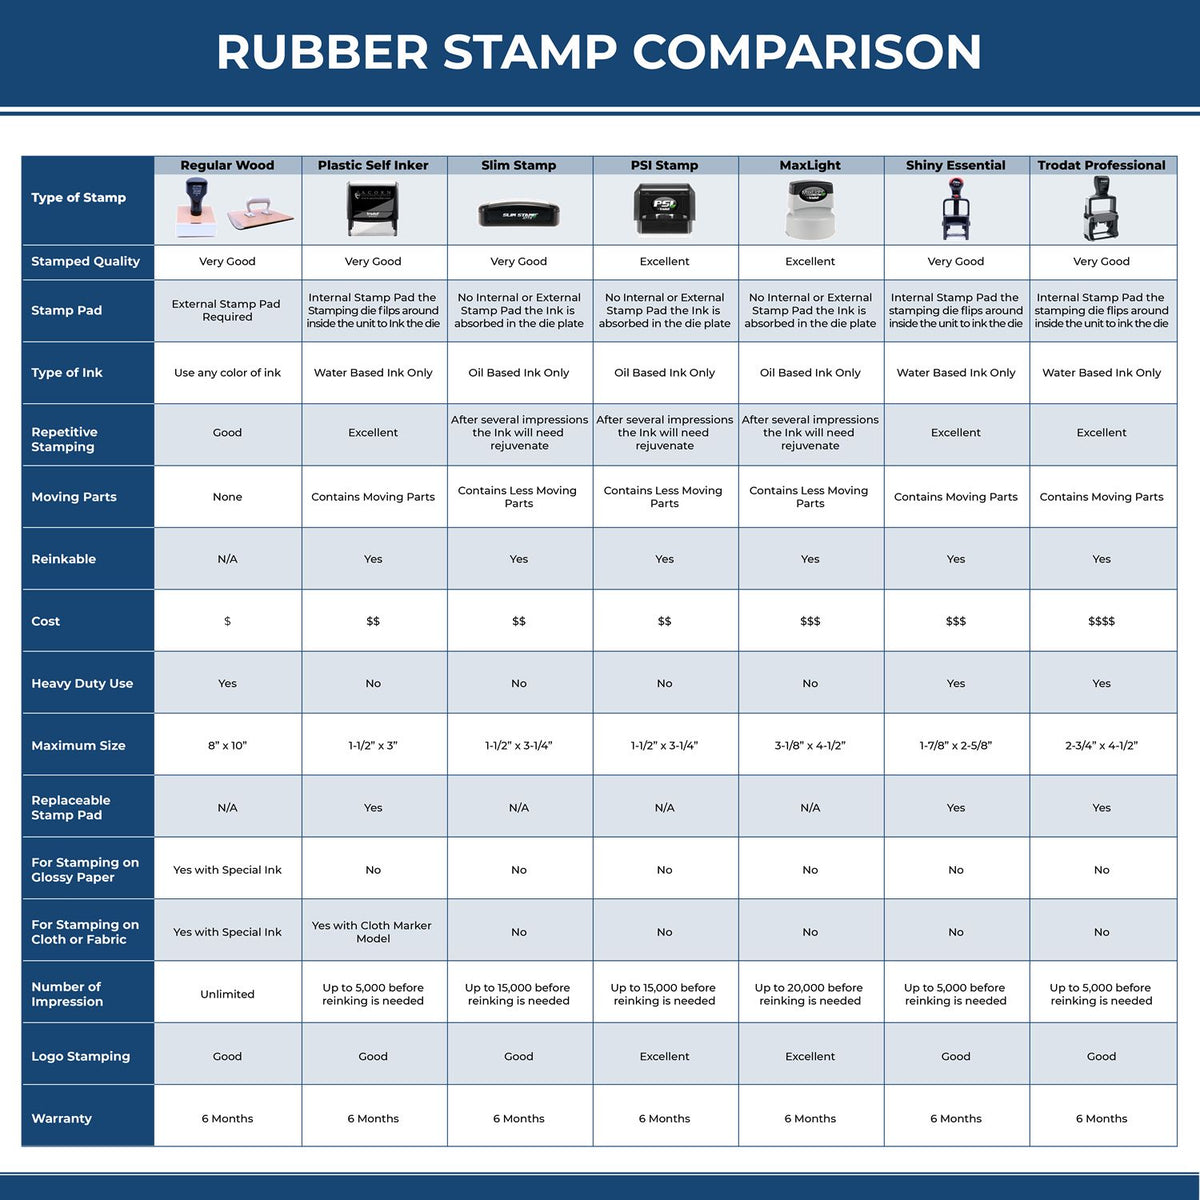 A comparison chart for the different types of mount models available for the Premium MaxLight Pre-Inked Montana Engineering Stamp.